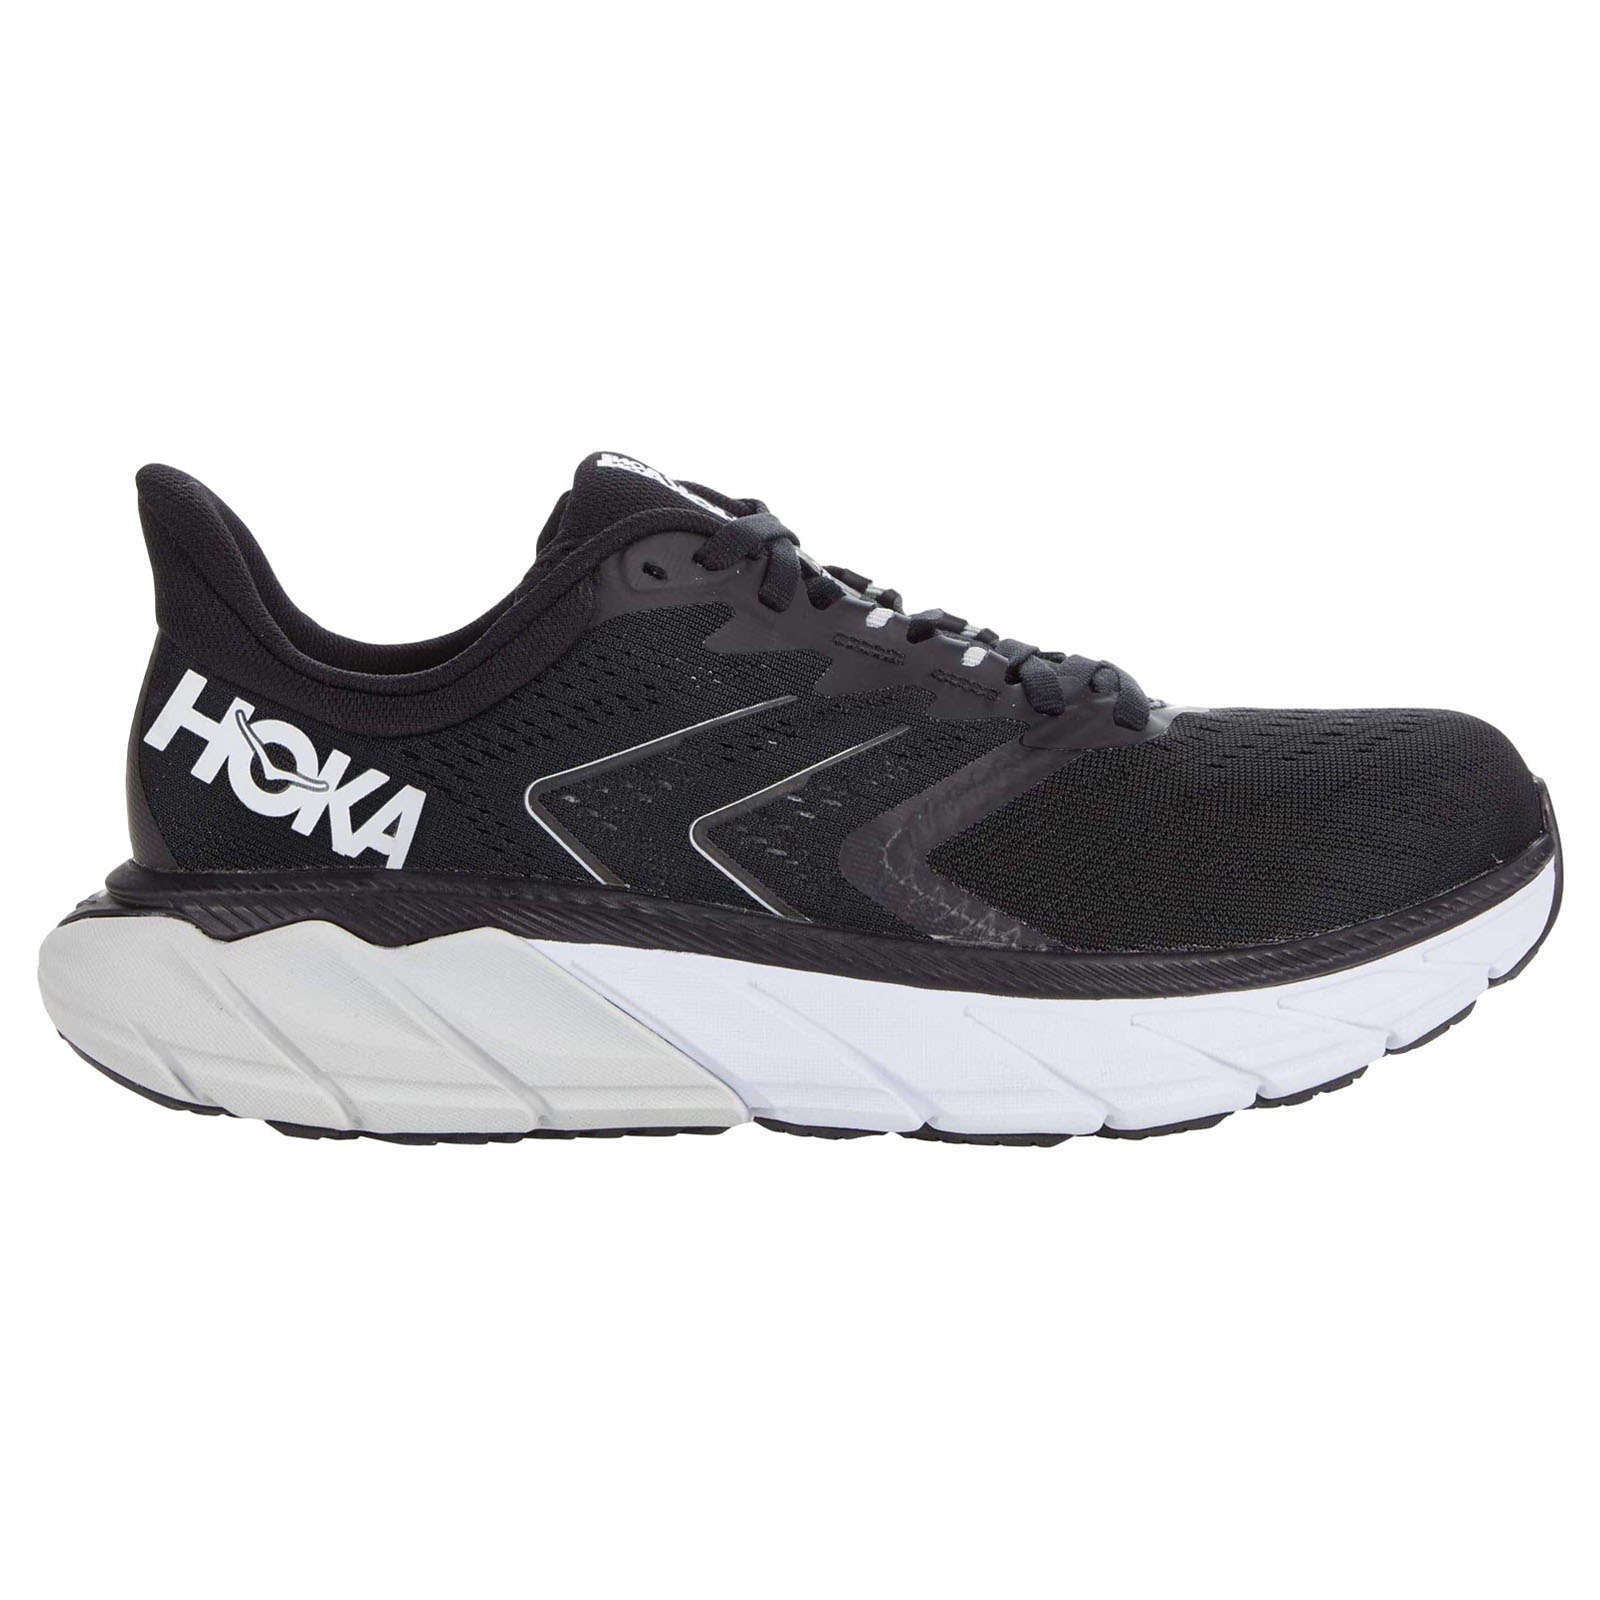 Hoka One One Arahi 5 Synthetic Textile Women's Low-Top Road Running Trainers#color_black white